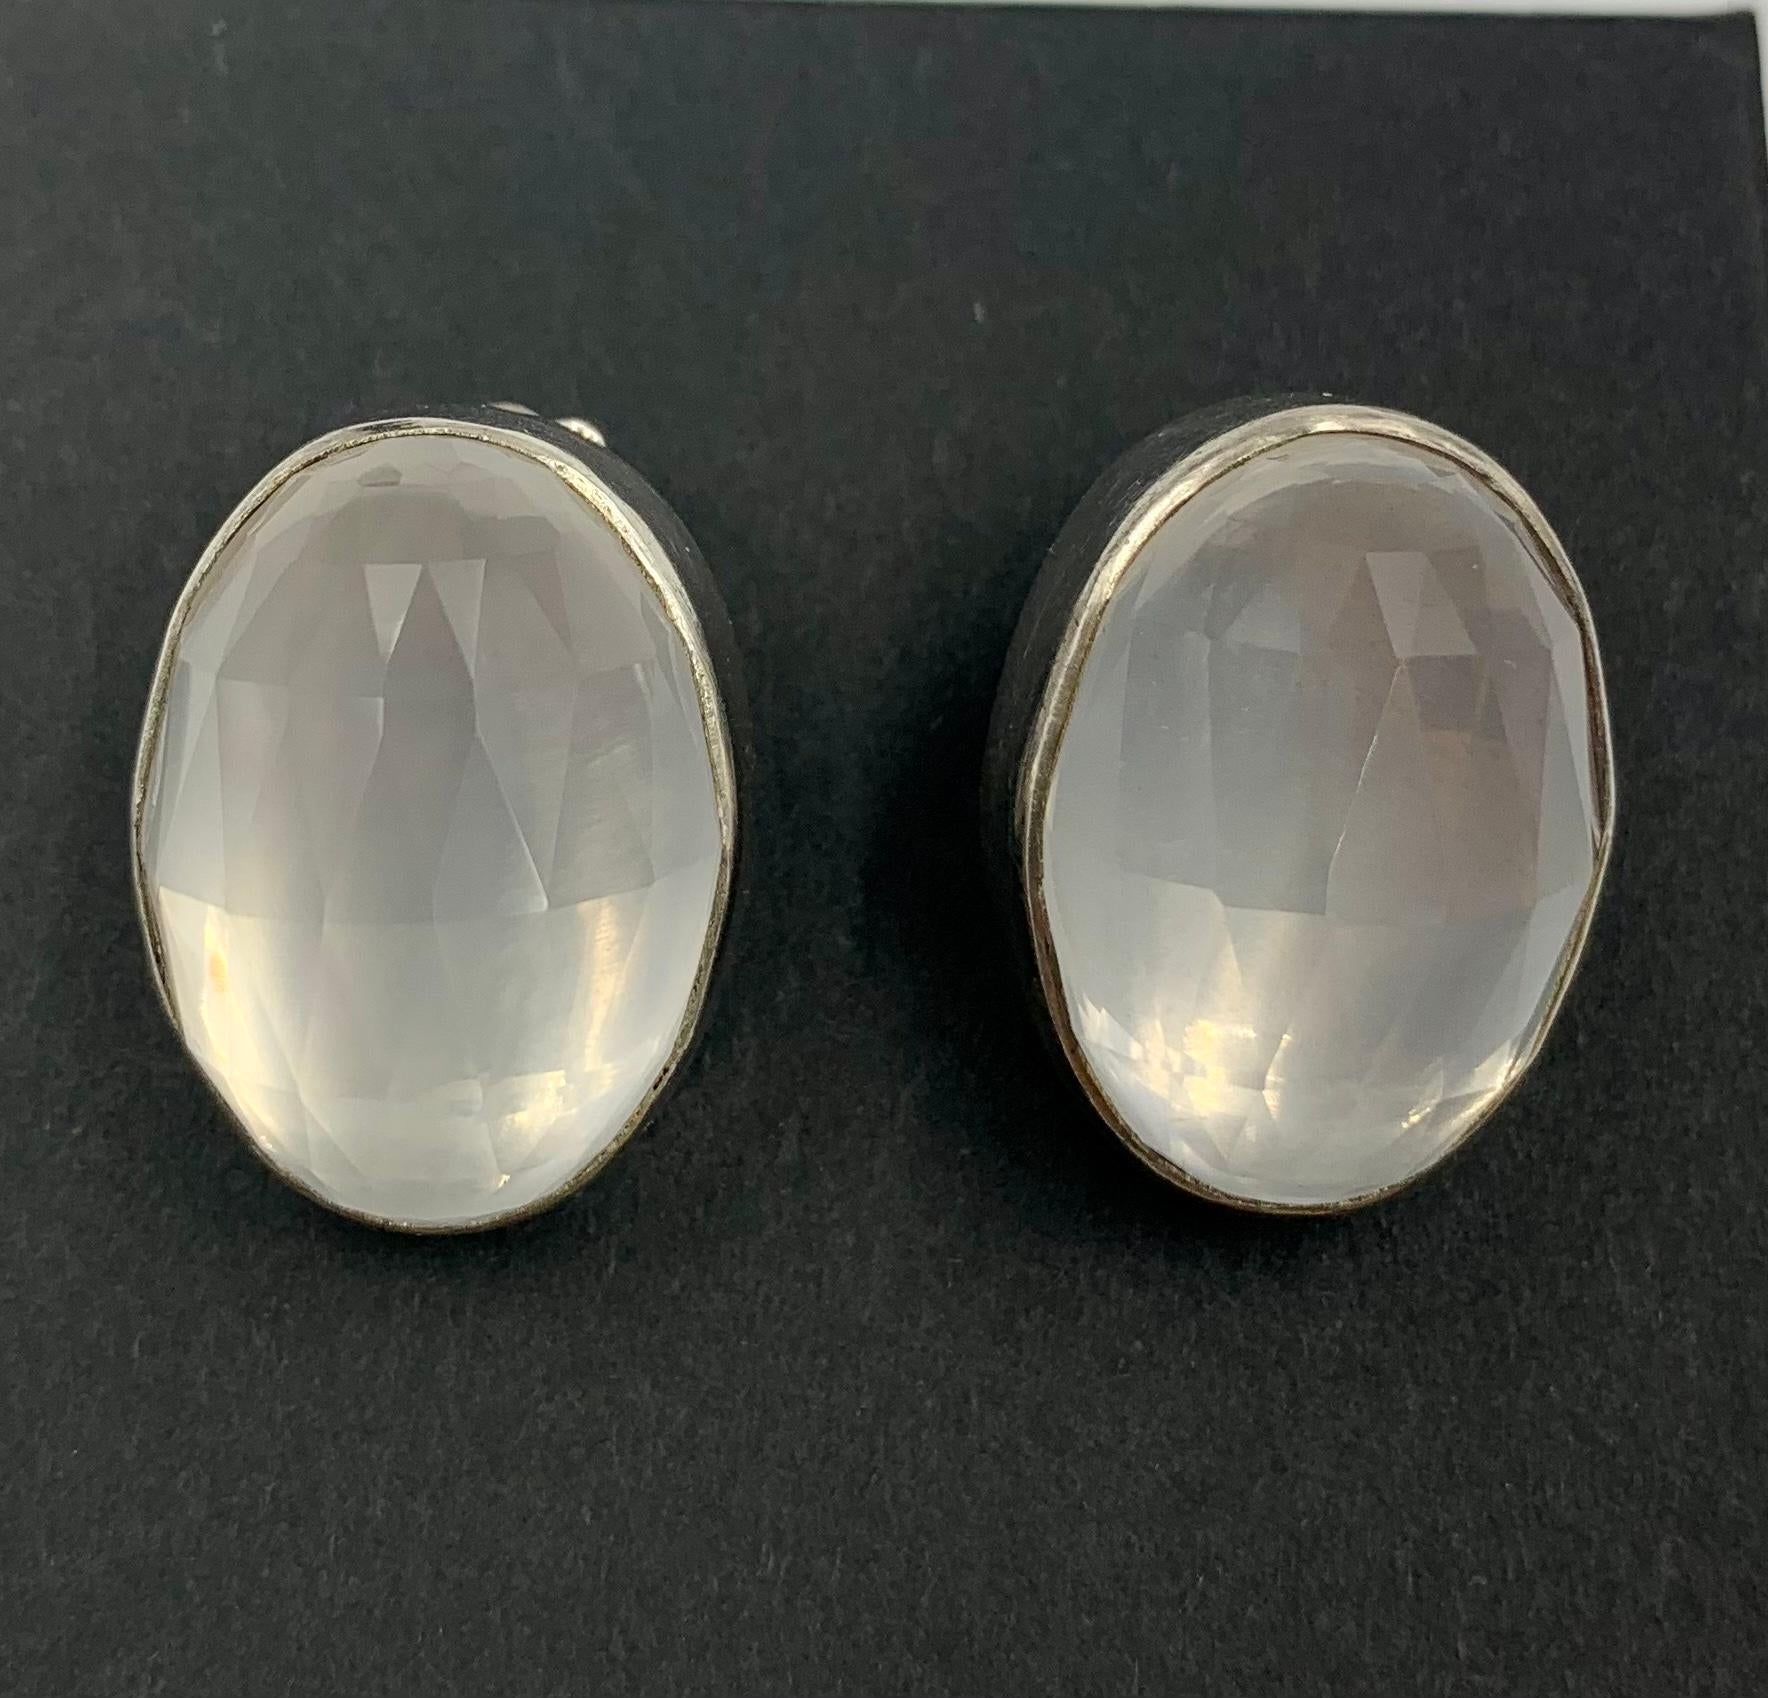 Elegant oval shaped faceted white calcedony and sterling silver One of a Kind earrings by Stephen Dweck
2003
Marks: 2003 Stephen Dweck, sterling, One of a Kind, #16303, 186
Clip backs
Size: 24mm by 17mm
Condition: Very Good
Stephen Dweck's One of a